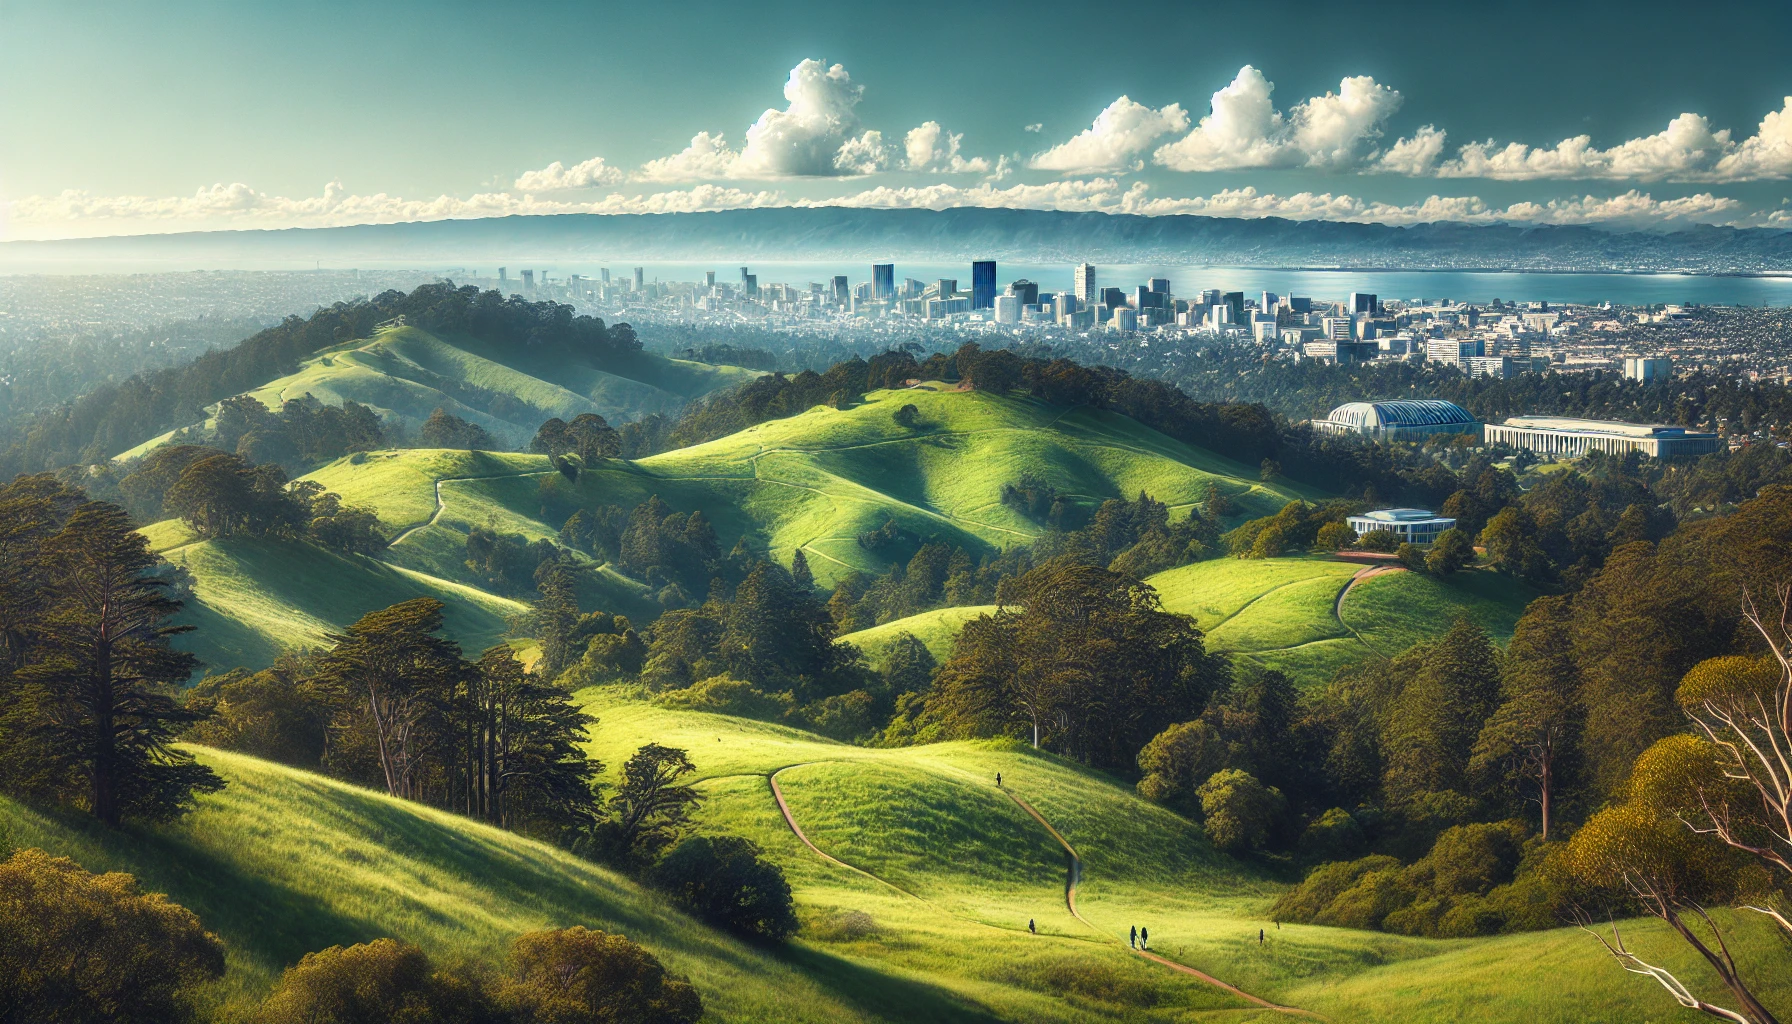 A panoramic view of Berkeley Hills during a clear day, showcasing lush green landscape, rolling hills, and patches of woodland, with the skyline of Berkeley city and the University of California, Berkeley campus in the distance. The blue sky has a few scattered clouds, adding to the serene and picturesque scenery. Hikers are seen on trails, highlighting the area's natural beauty and recreational opportunities.